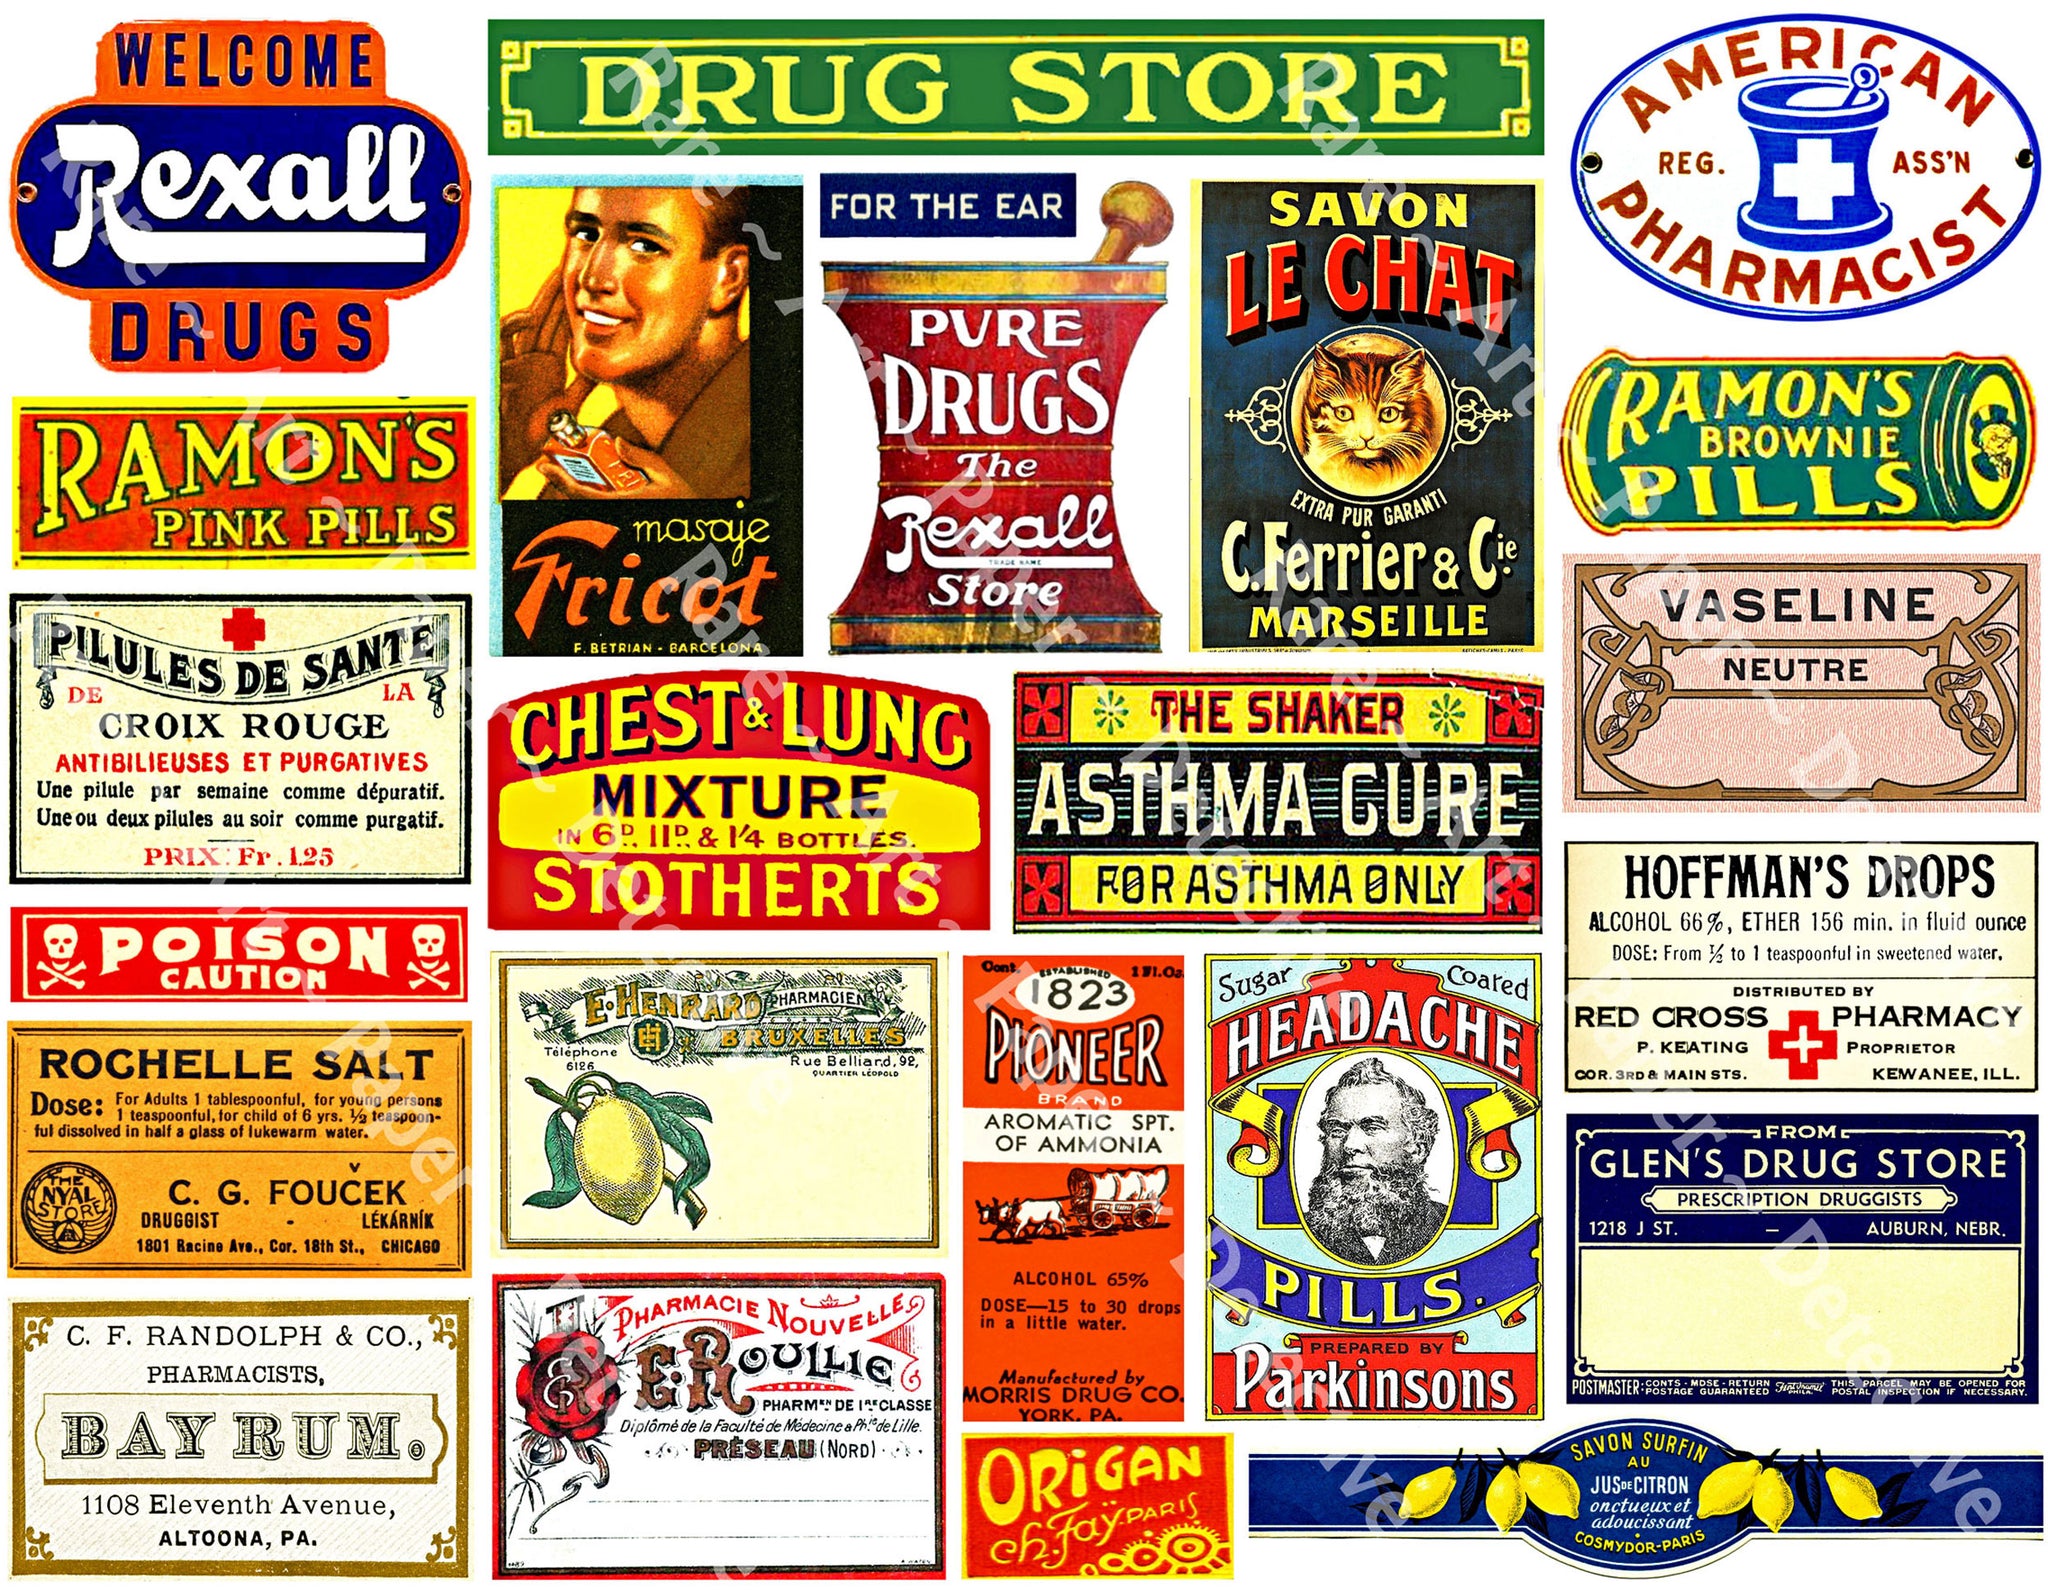 16 Unique Apothecary Label Stickers, Pharmacy & Druggist Decal Set #824